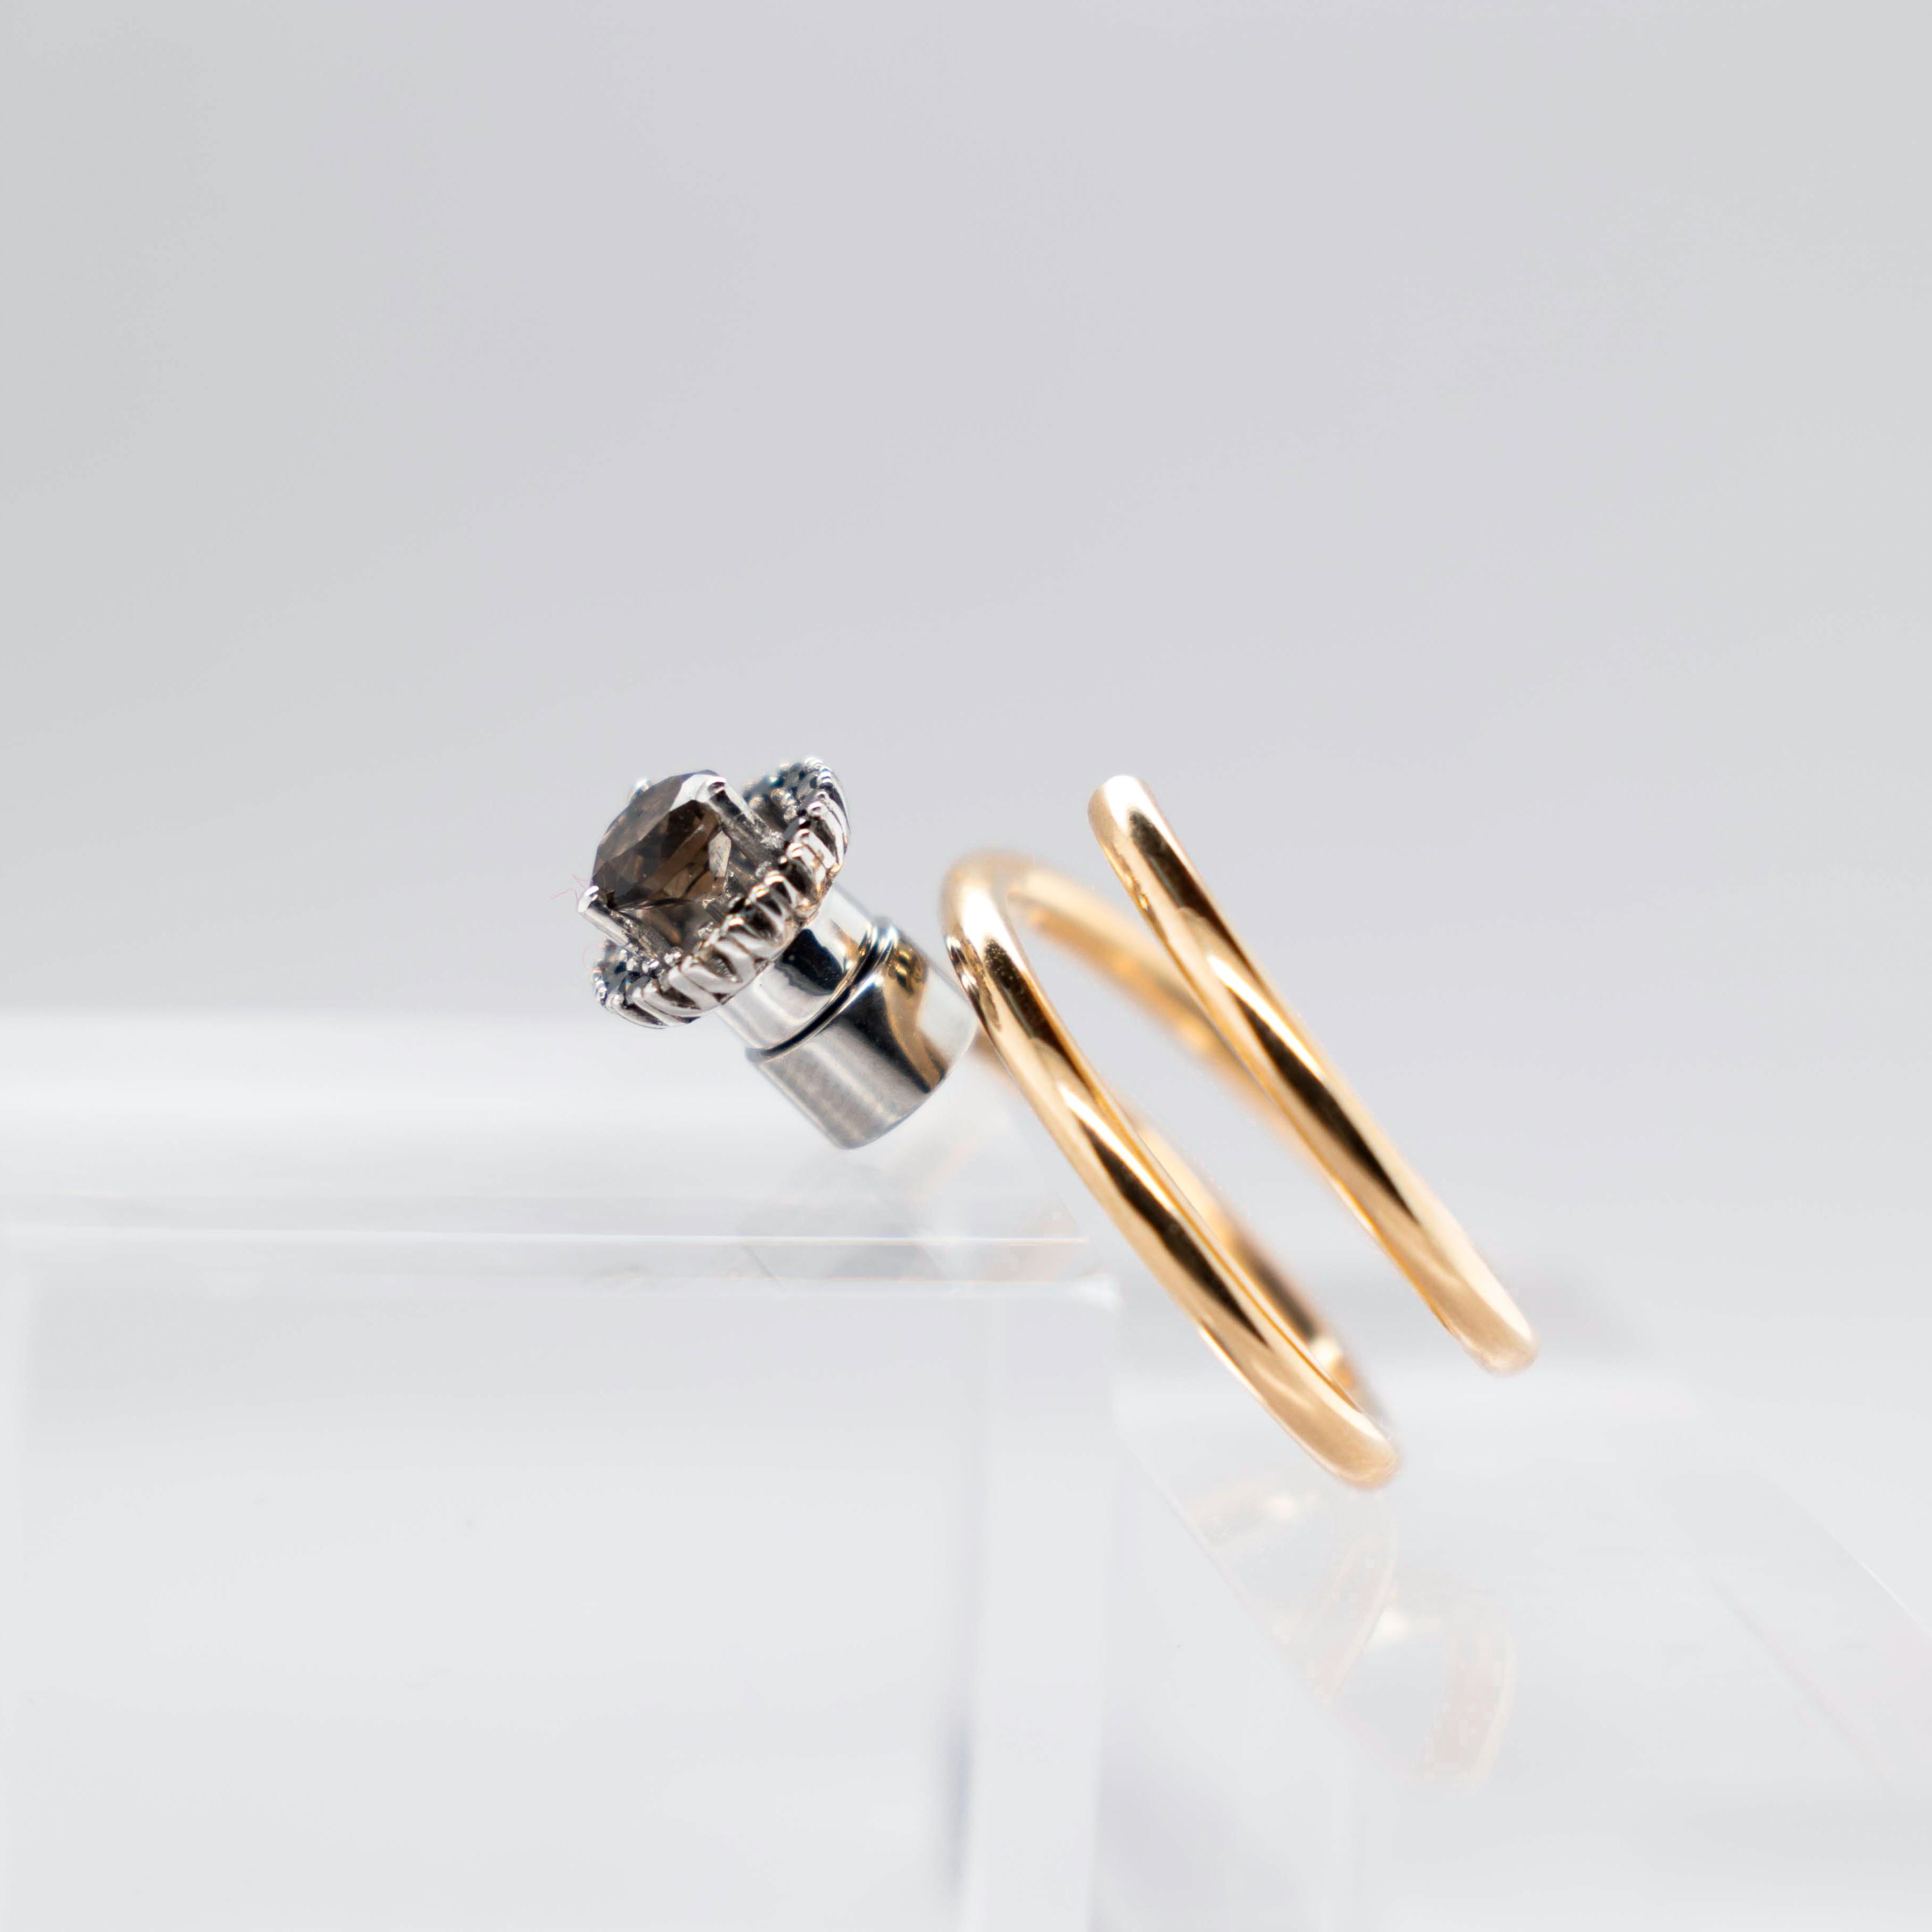 Halo Engagement Ring with Diamonds A (17 units, 1mm Ø) & Smoked Quartz (0.7 ct), brilliant cut in a Head White, 18K 
Elastic Spiral Yellow Gold Ring, 18K

You can put and take on, the Smoked Quartz with Halo of Black Diamonds in White Gold (18K), in